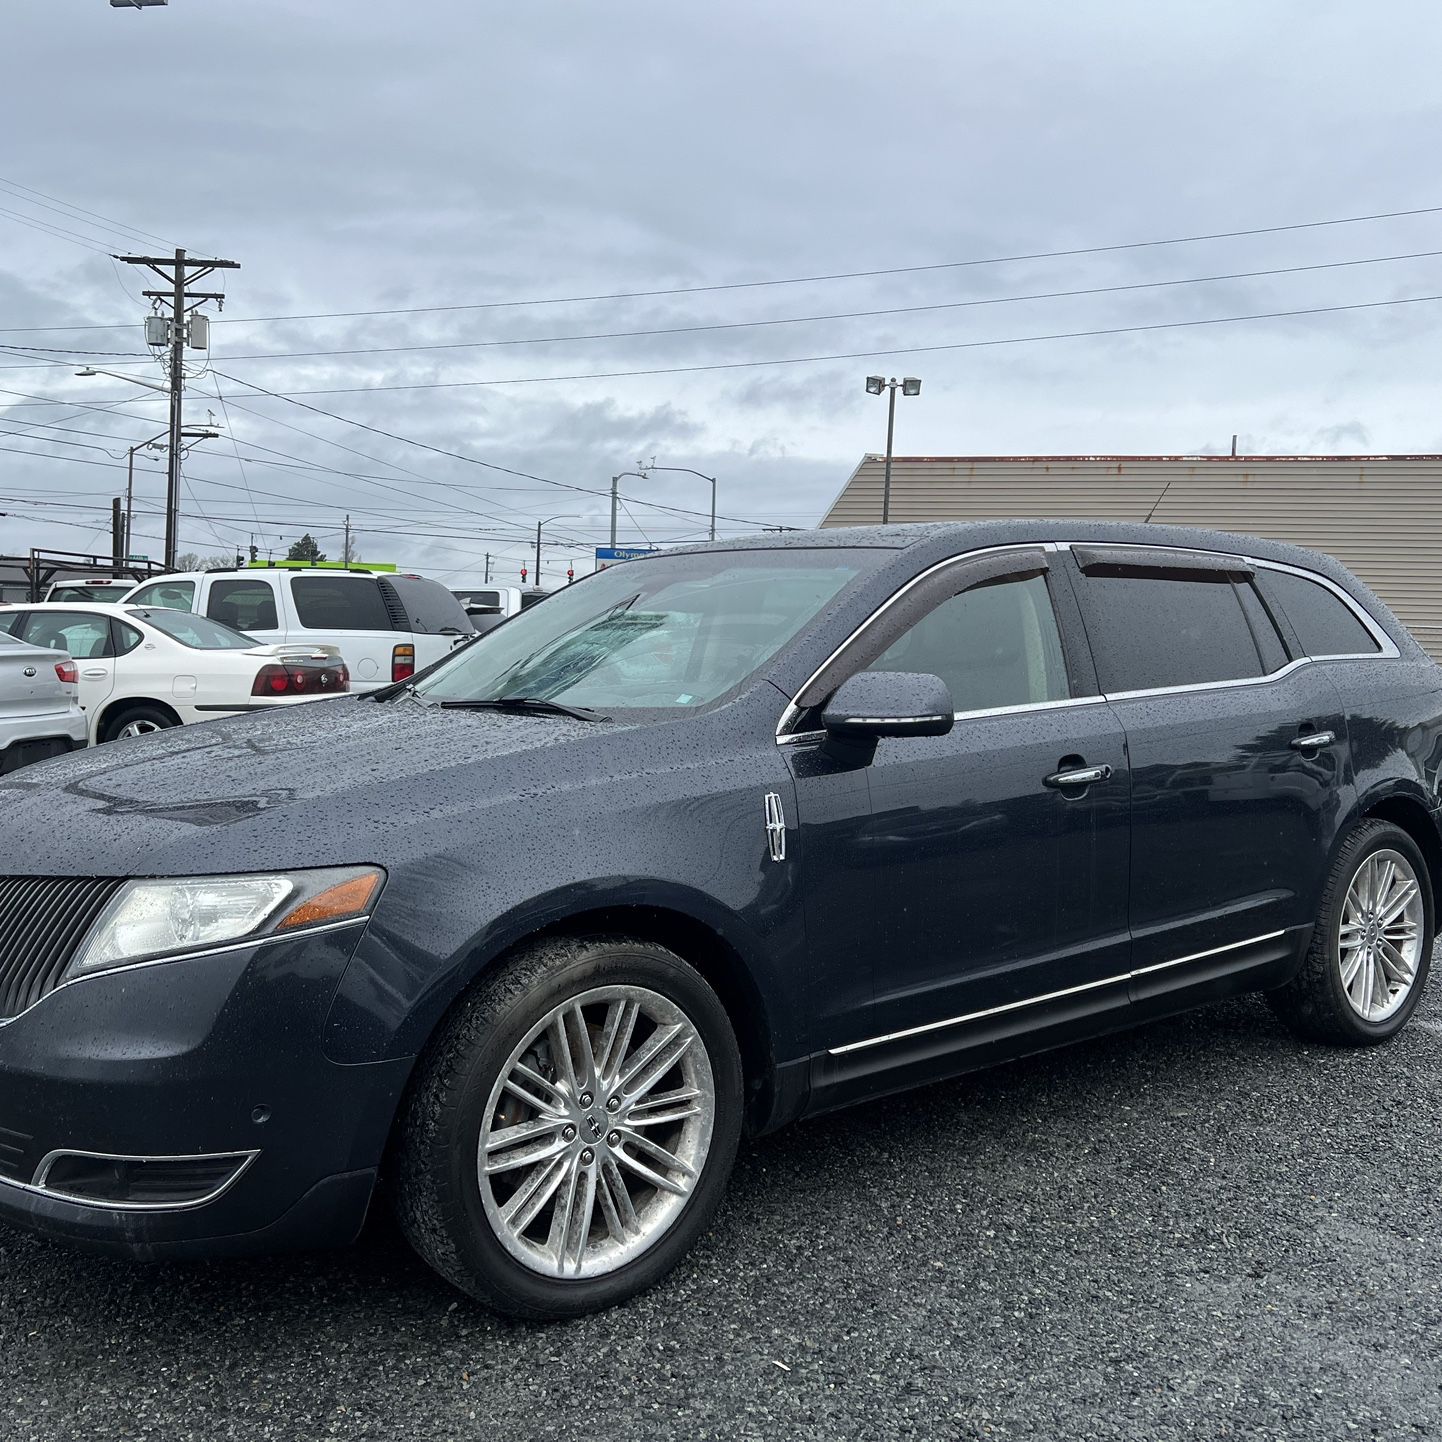 2014 Lincoln MKT Base 4D SUV AWD EcoBoost Clean title  Runs great  Panoramic sunroof  227k miles Runs and drives good  Leather  3rd row seats  253-444